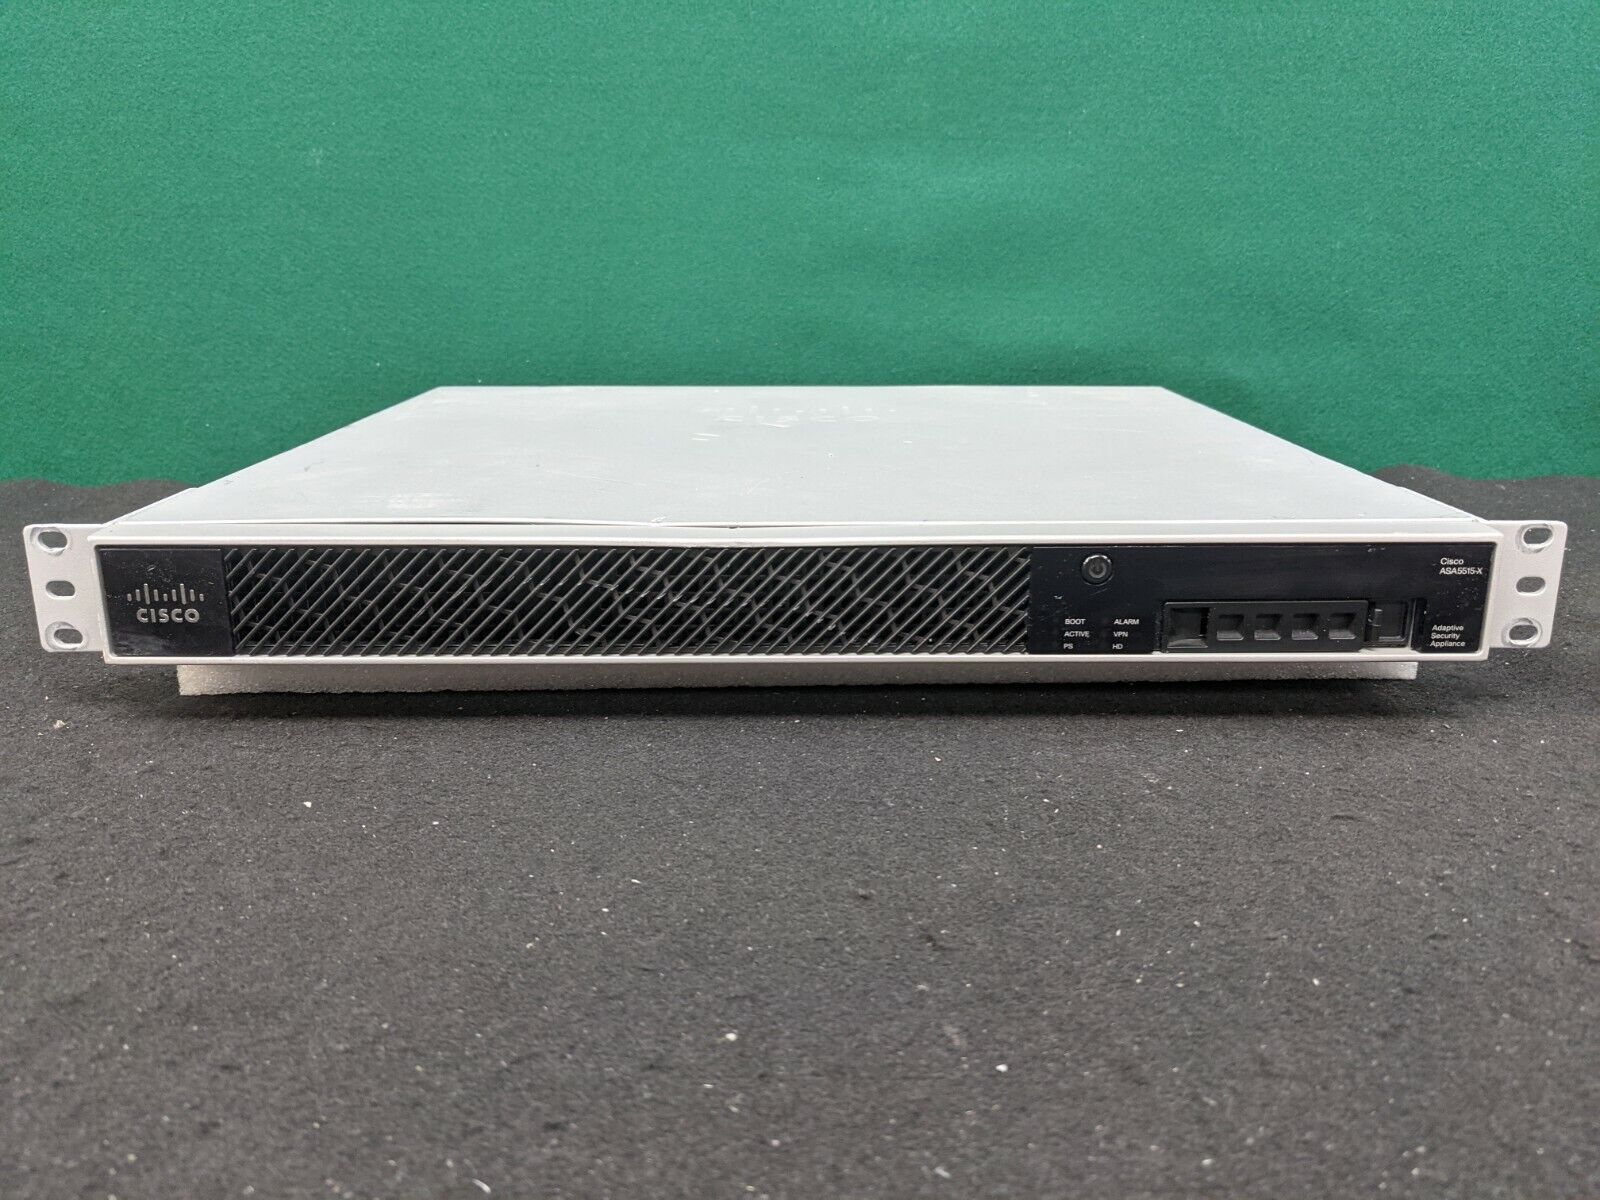 Cisco ASA5515-X Adaptive Security Appliance 250 anyconnect essentials No HDD